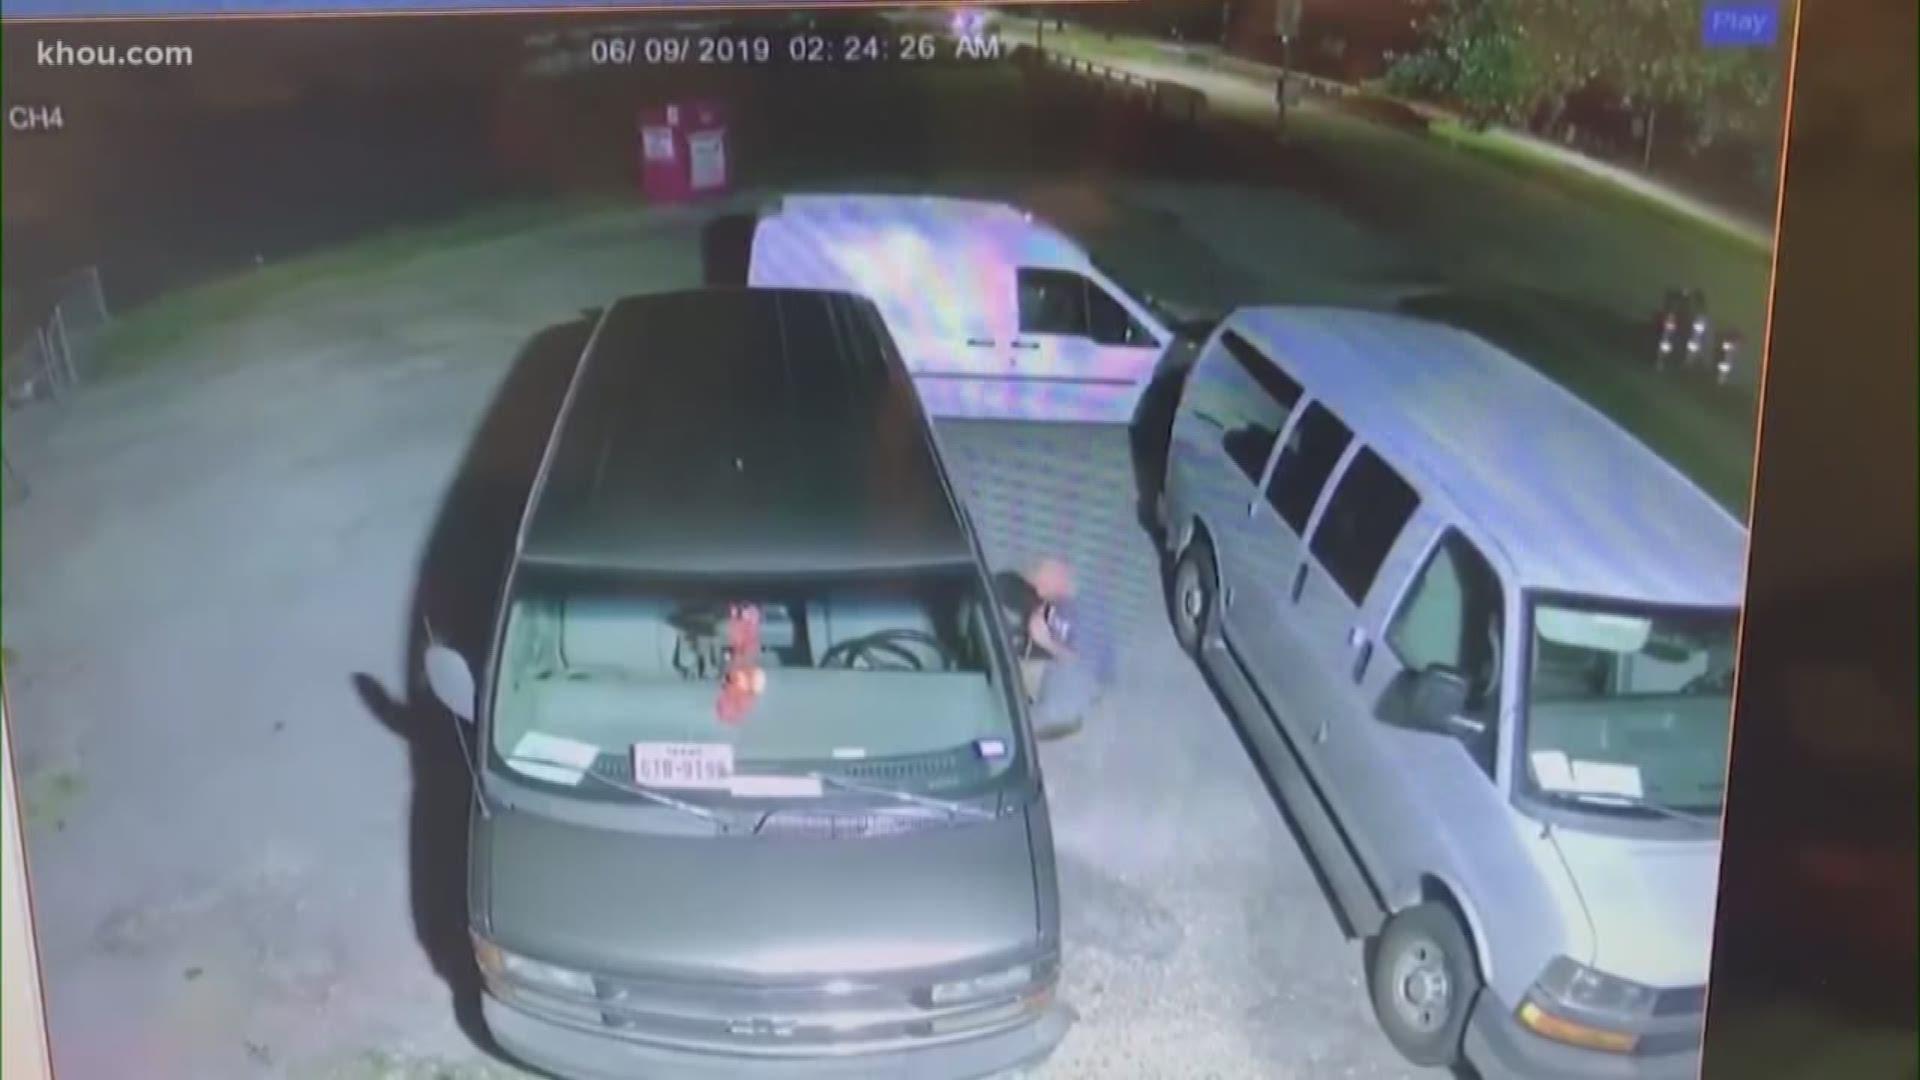 Someone has been caught on camera stealing gas from daycare vans in southeast Houston.

He was caught on camera twice in one week.

On Sunday at around 2:30 a.m., surveillance video showed the suspect in a white vehicle drive up to Kid N Play Daycare on Fuqua Street.